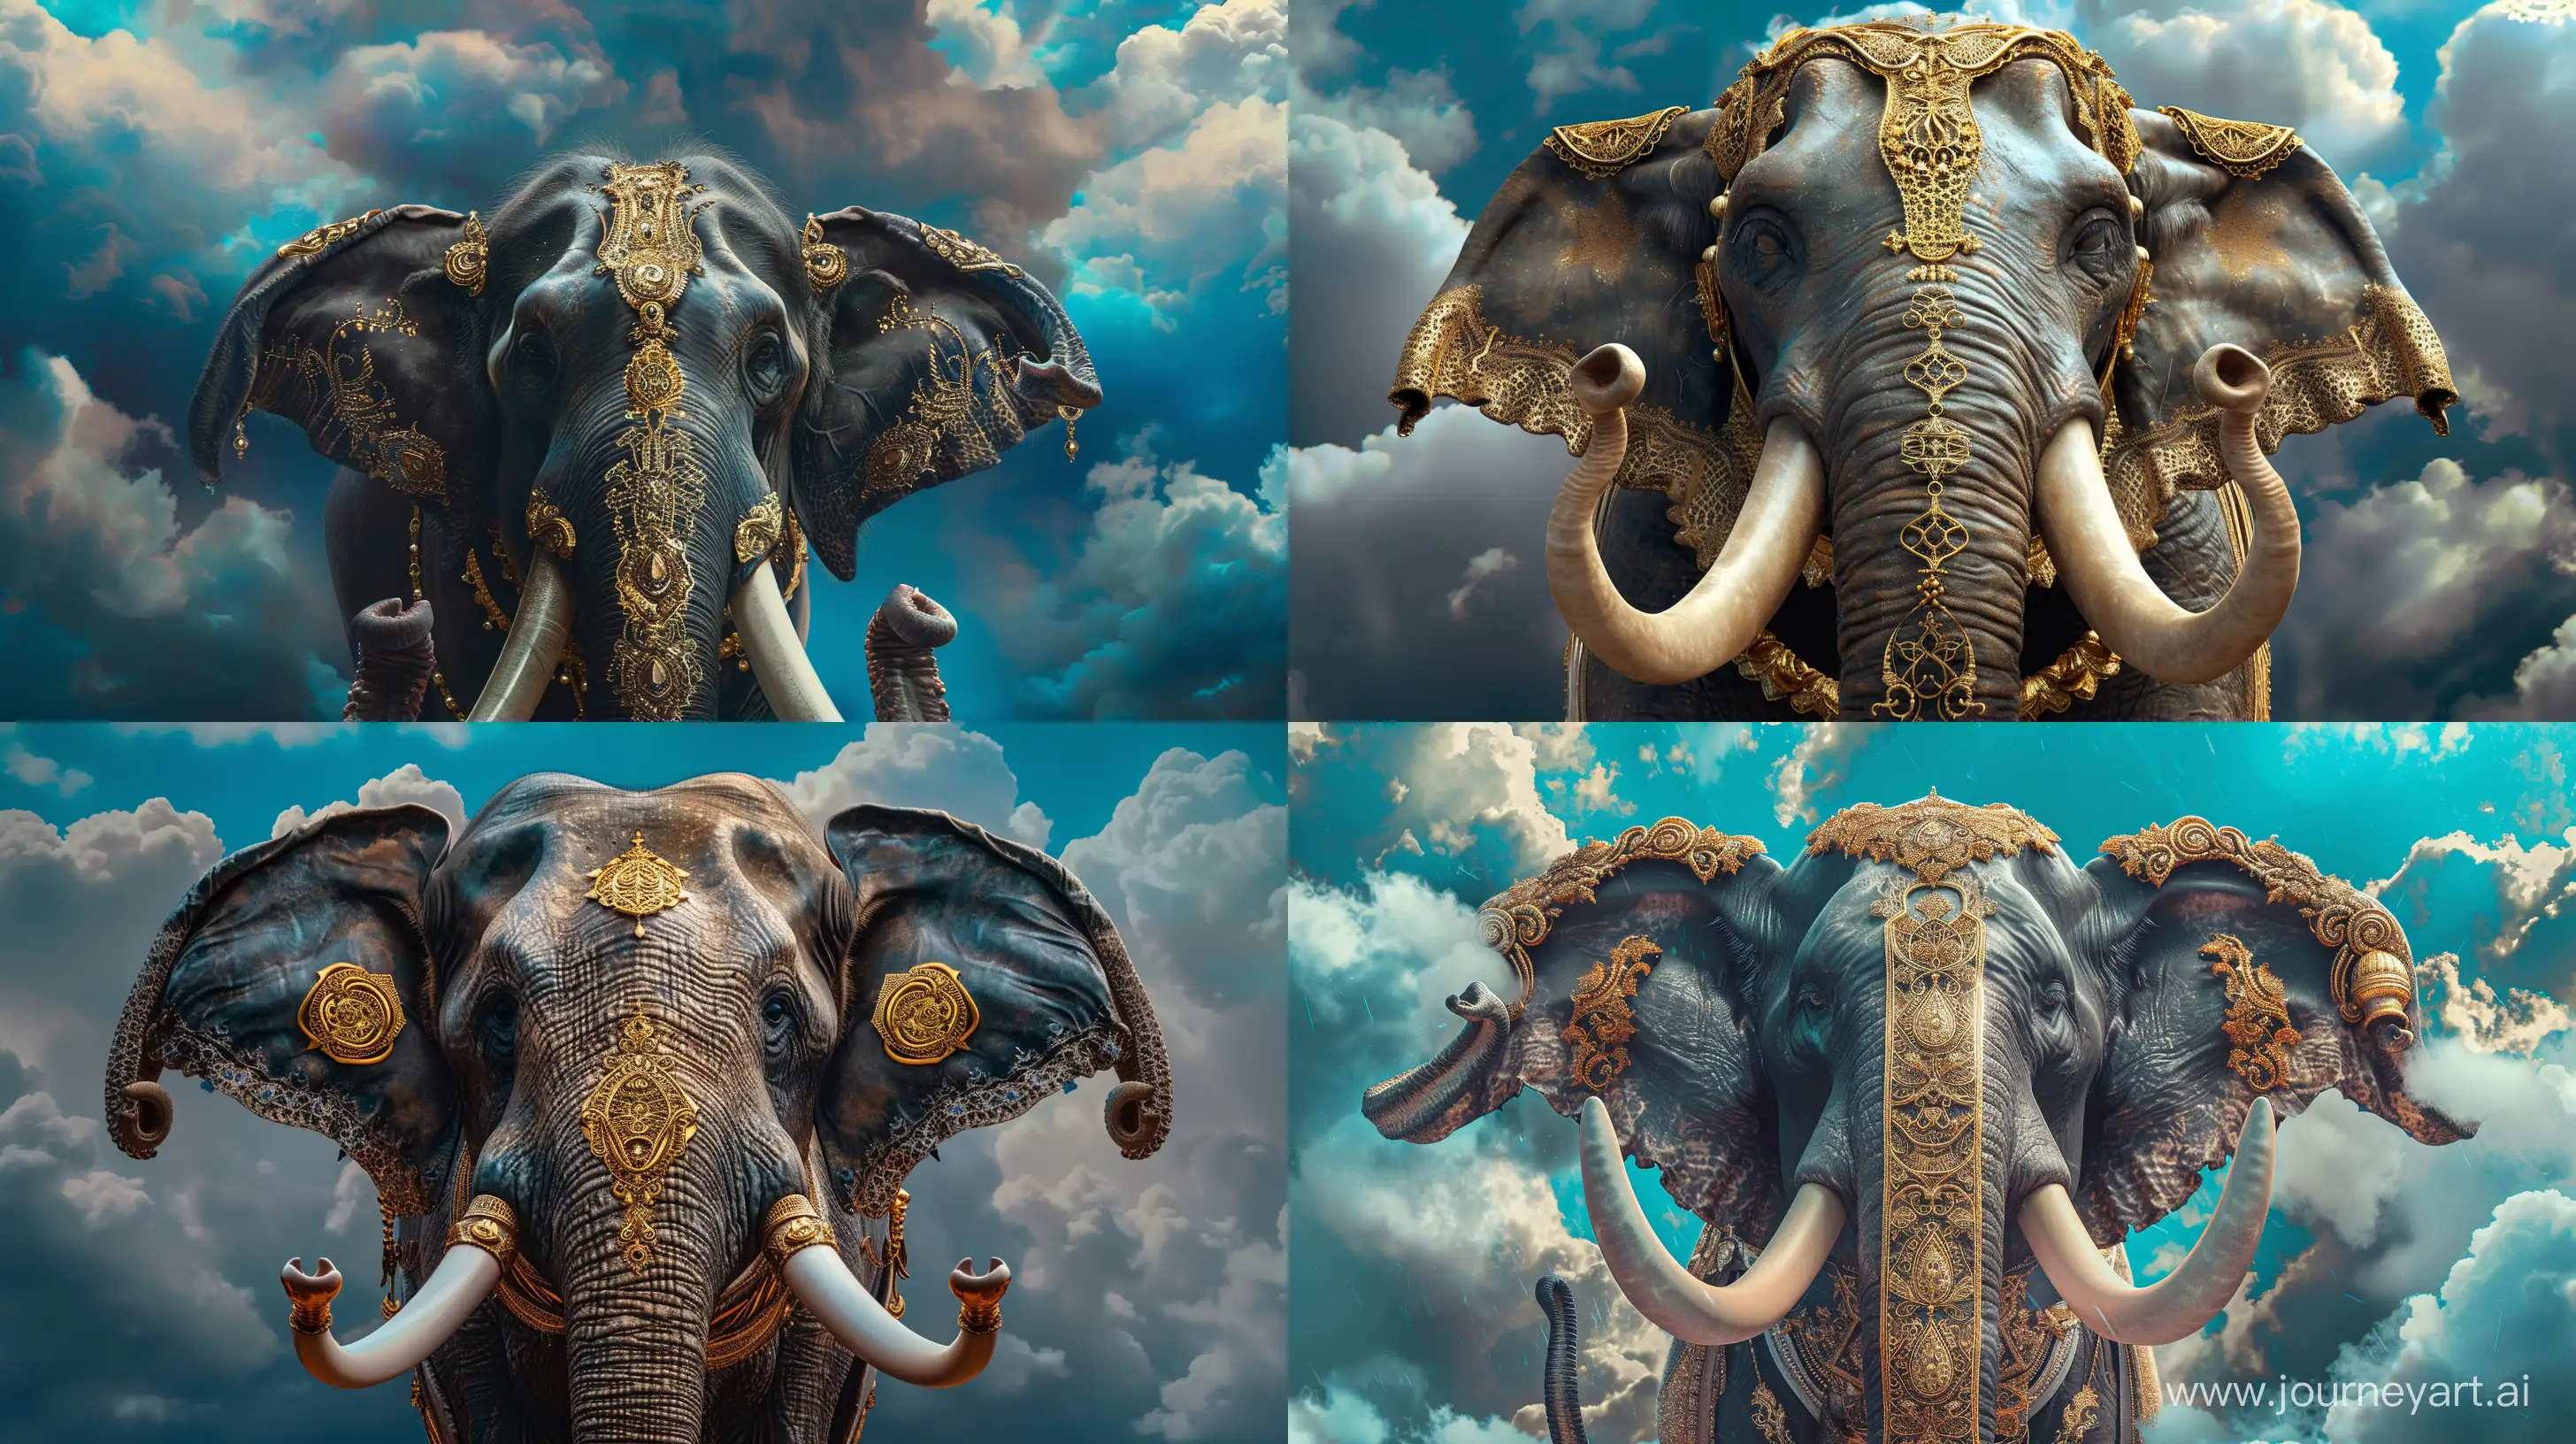 a majestically divine elephant with four tusks. Each tusks are adorned with golden ornaments, enhancing its beauty. elephant's trunk is adorned with golden filigree with intricate patterns. blue clouds on the background. cinematic, ambient lighting, highly detailed --ar 16:9 